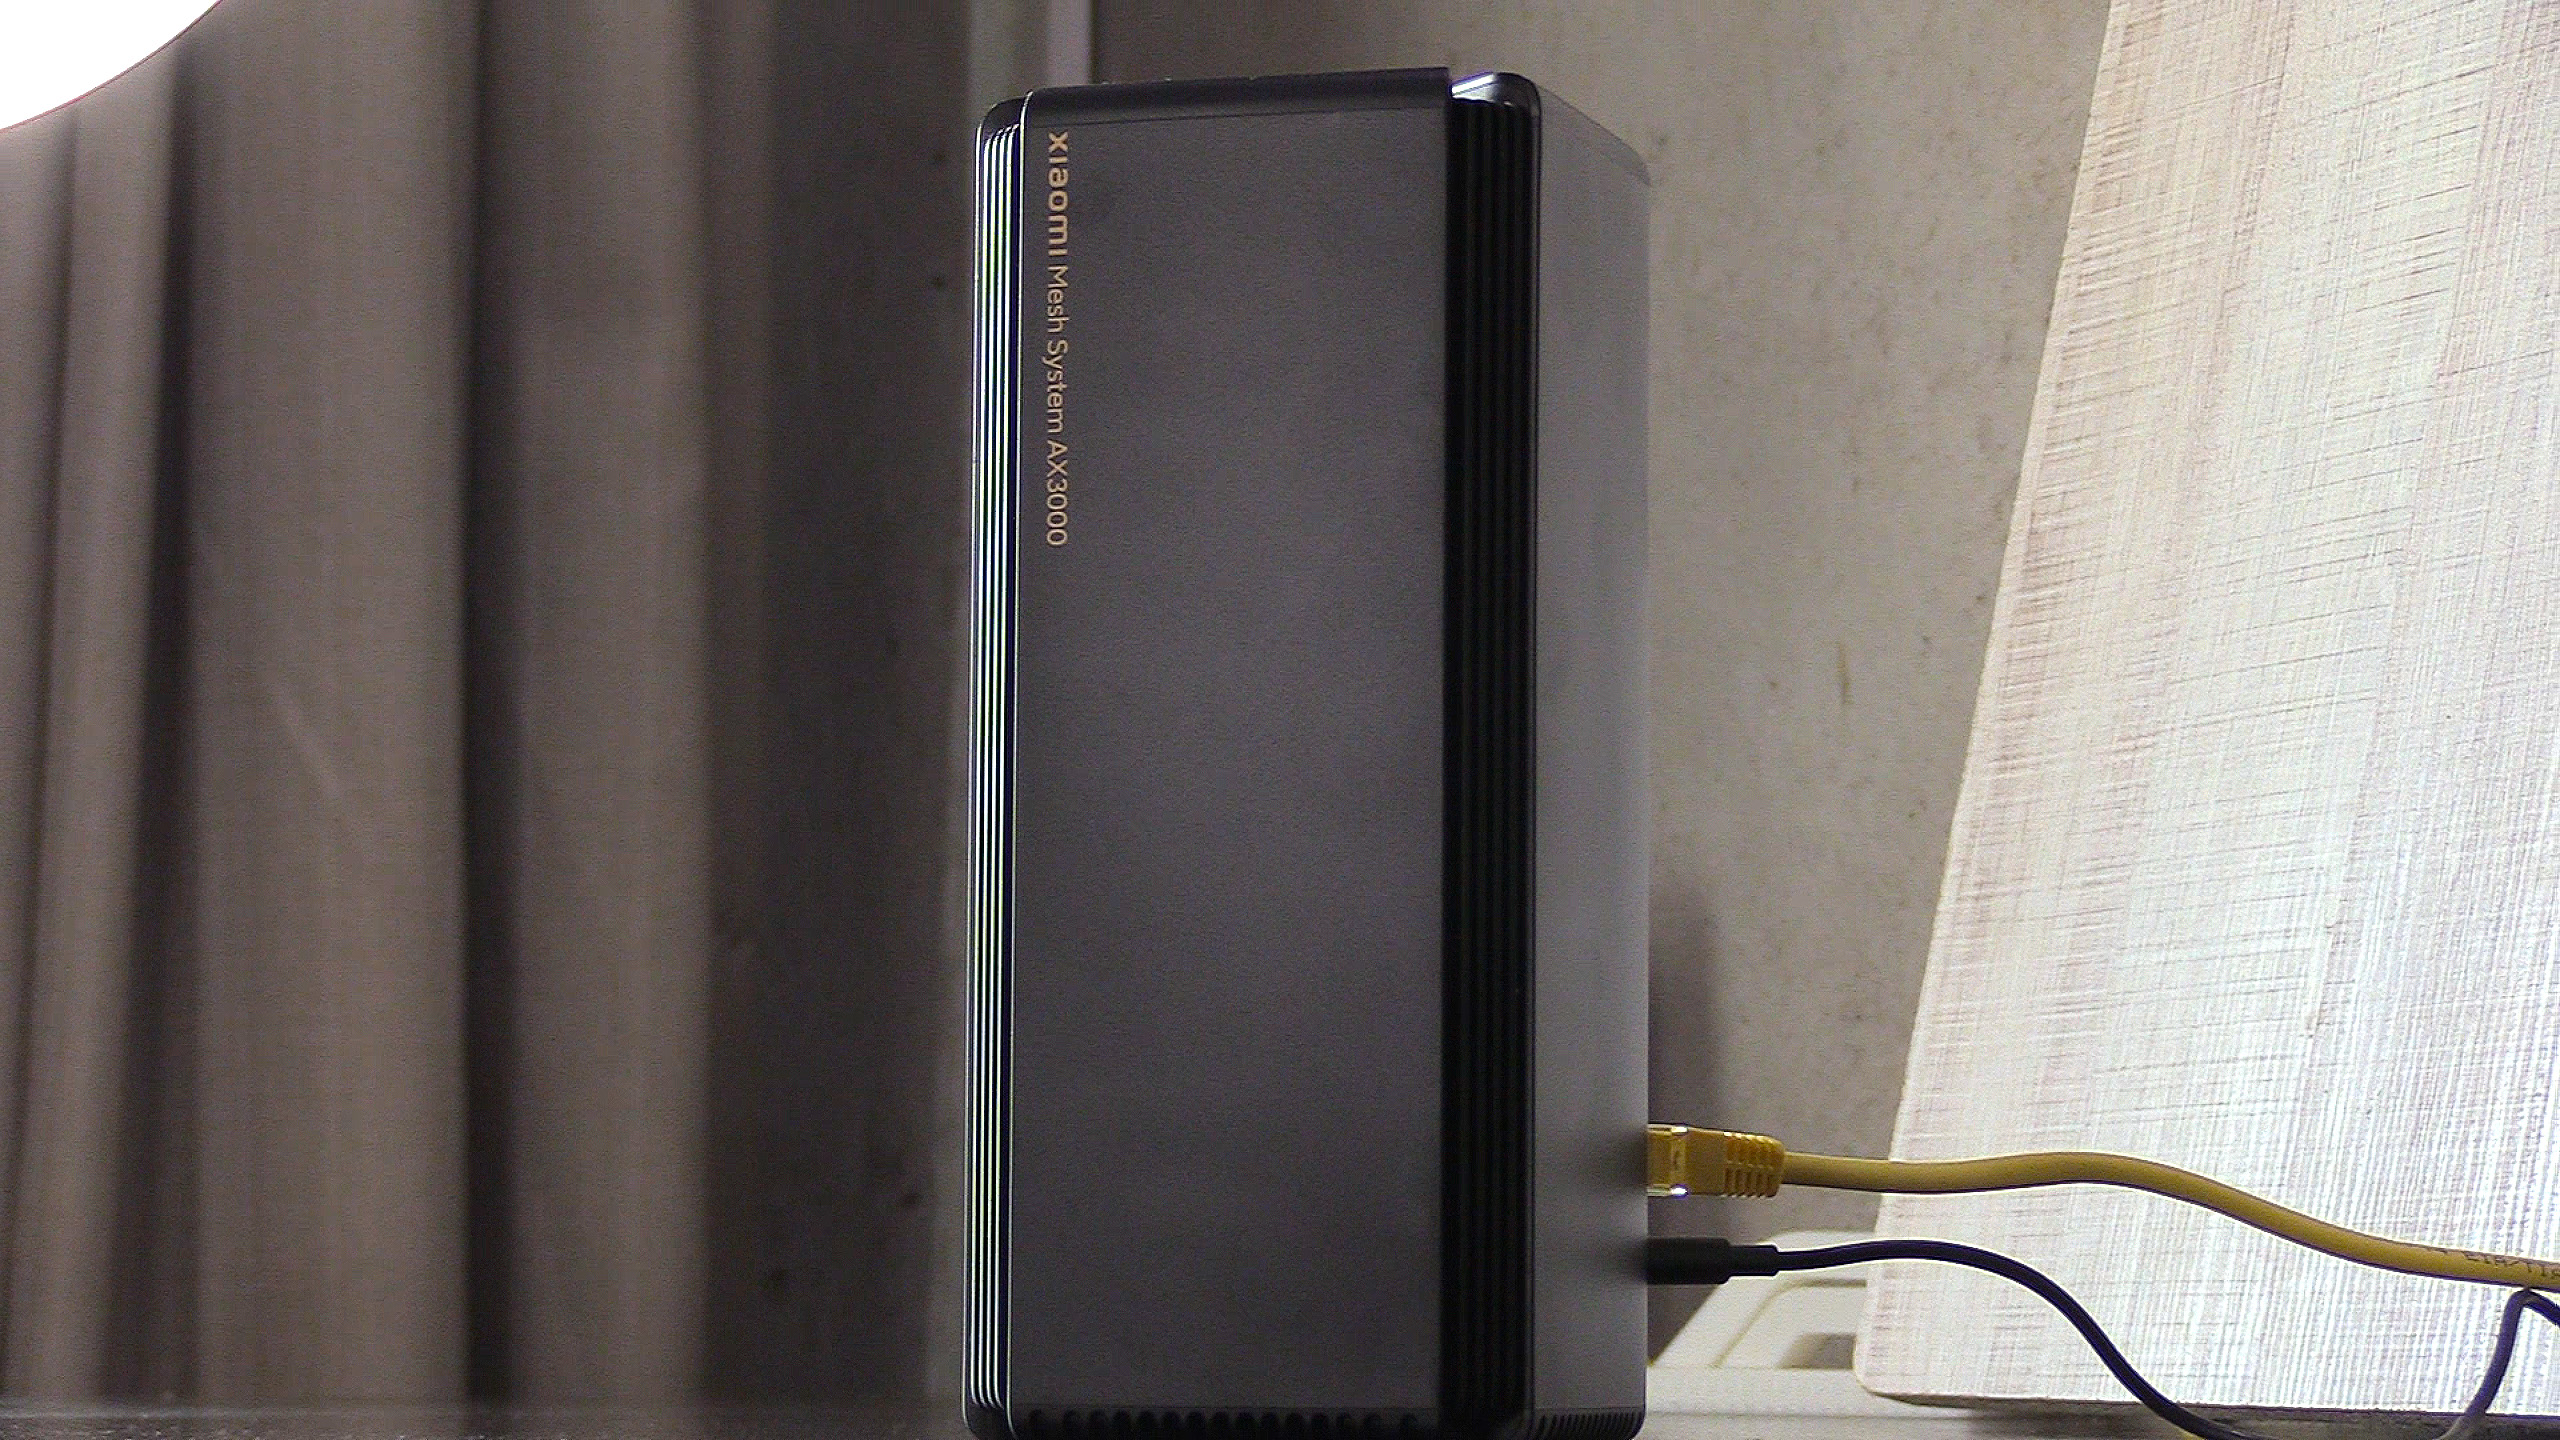 Xiaomi AX3000 Mesh router. A stealthy box with no unsightly